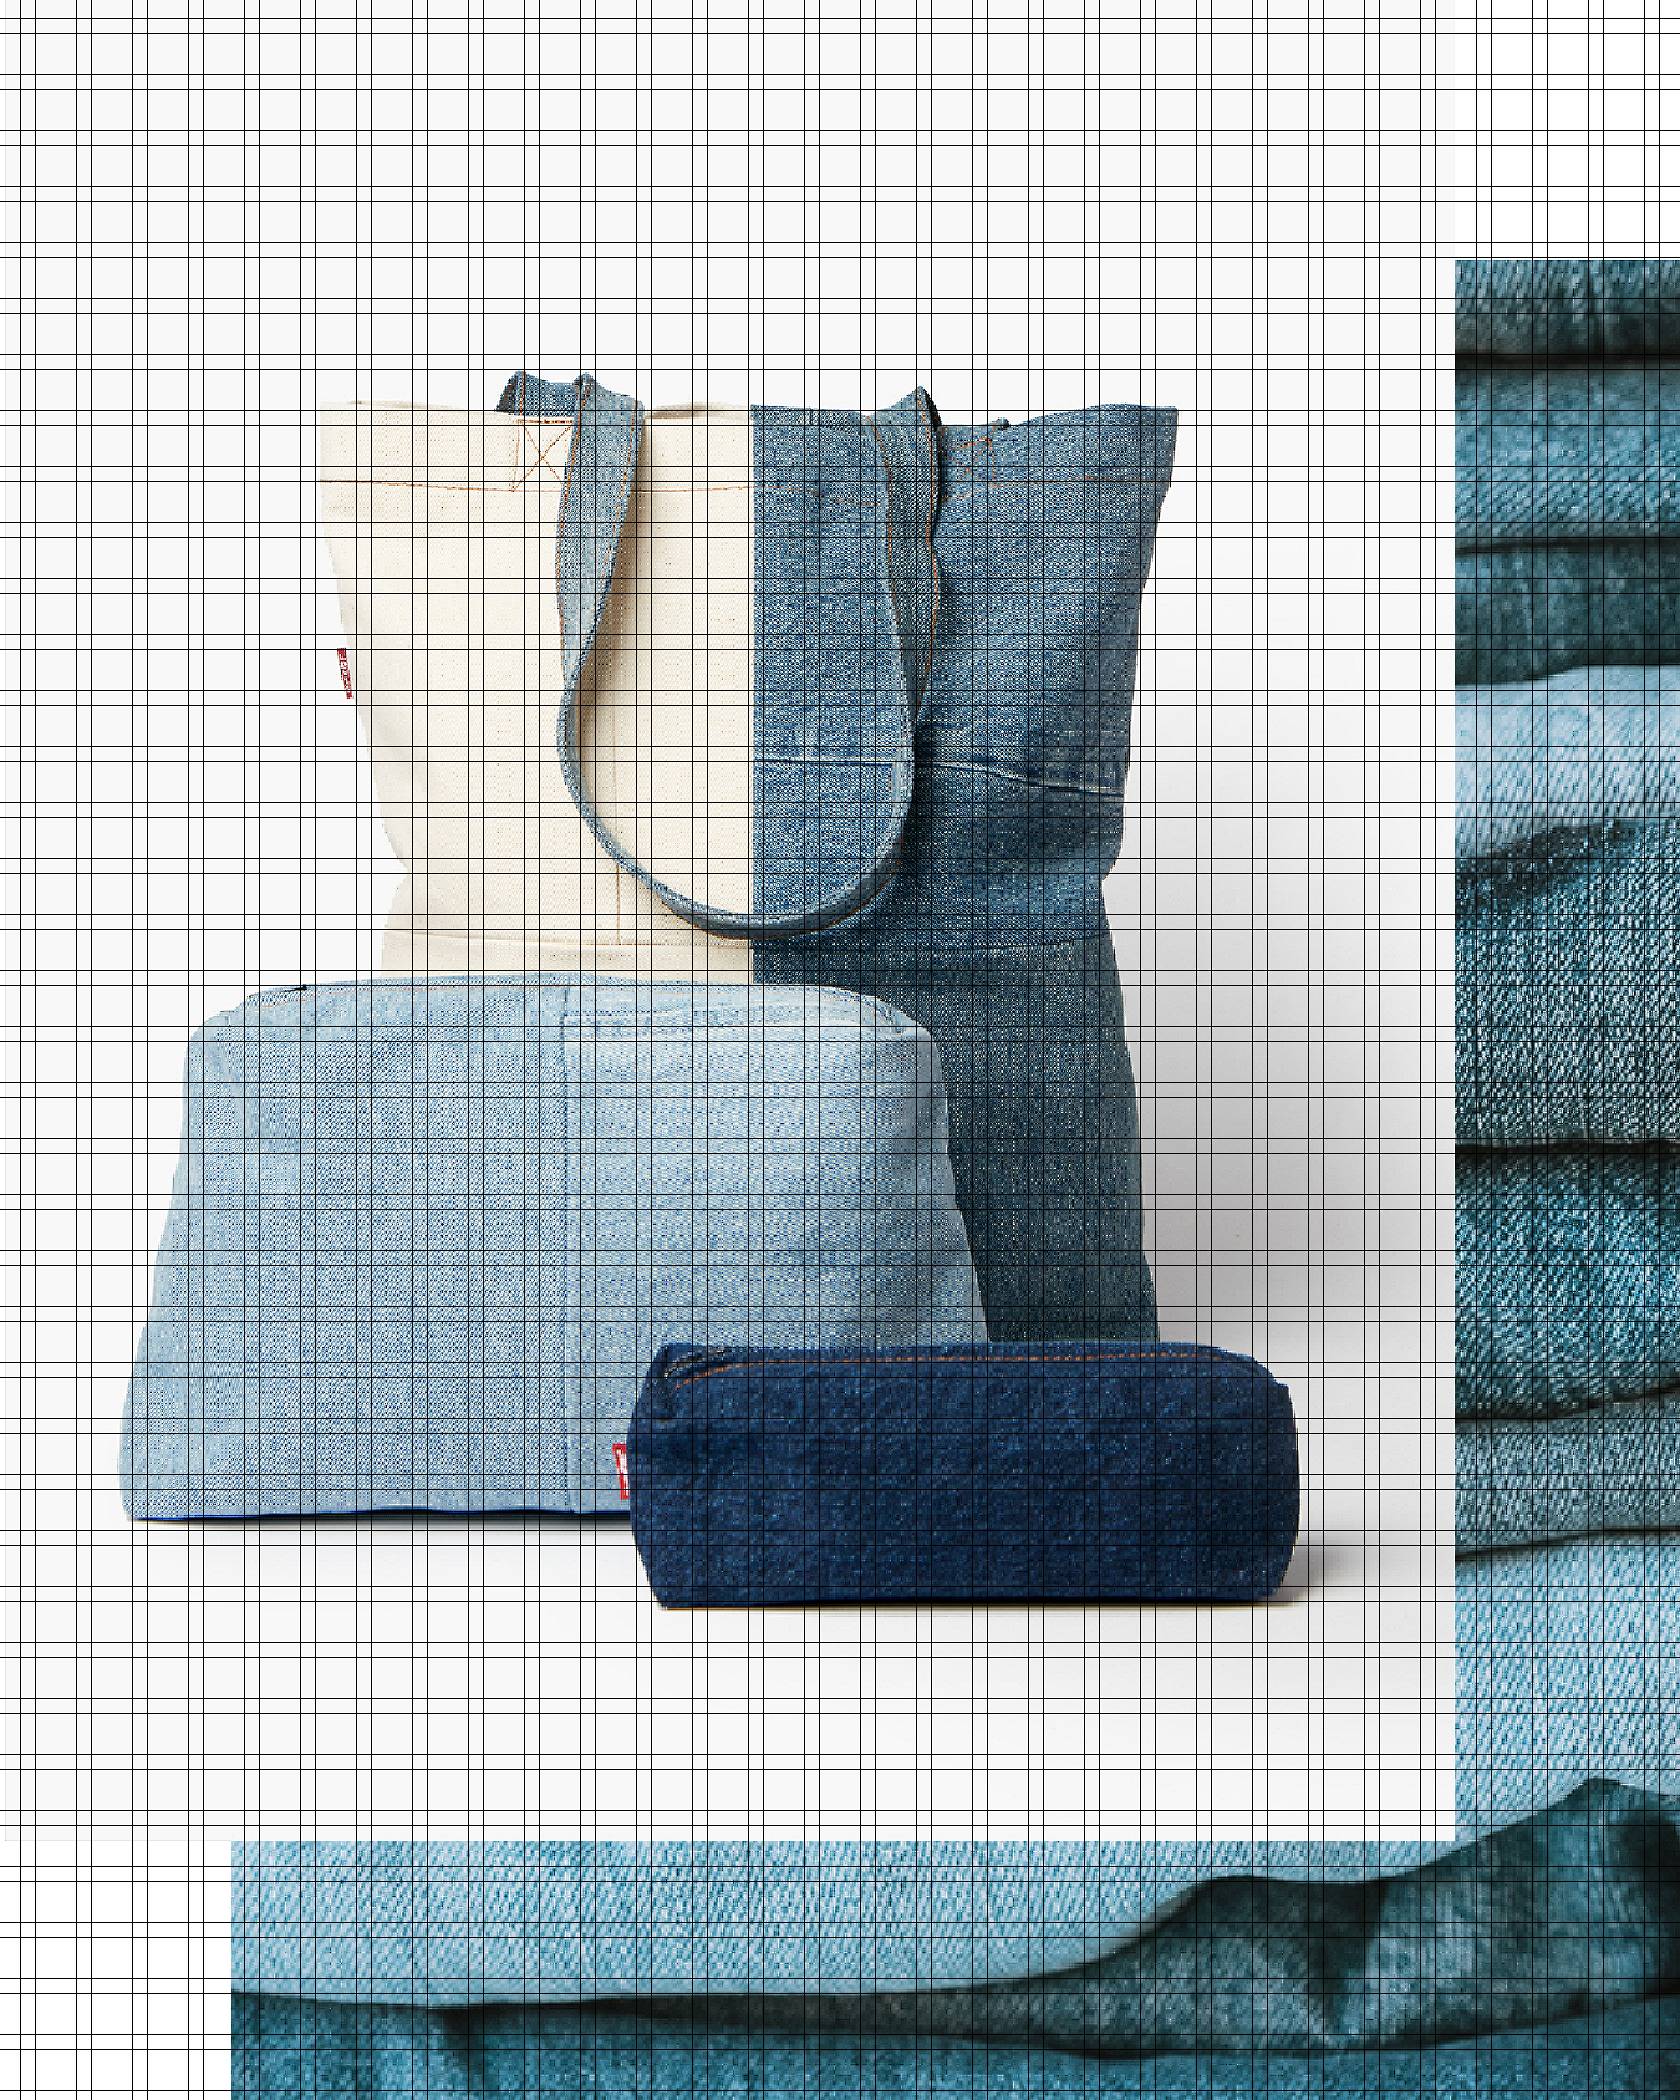 Refurbished denim products made by Porto Alegre coop for Levi's®